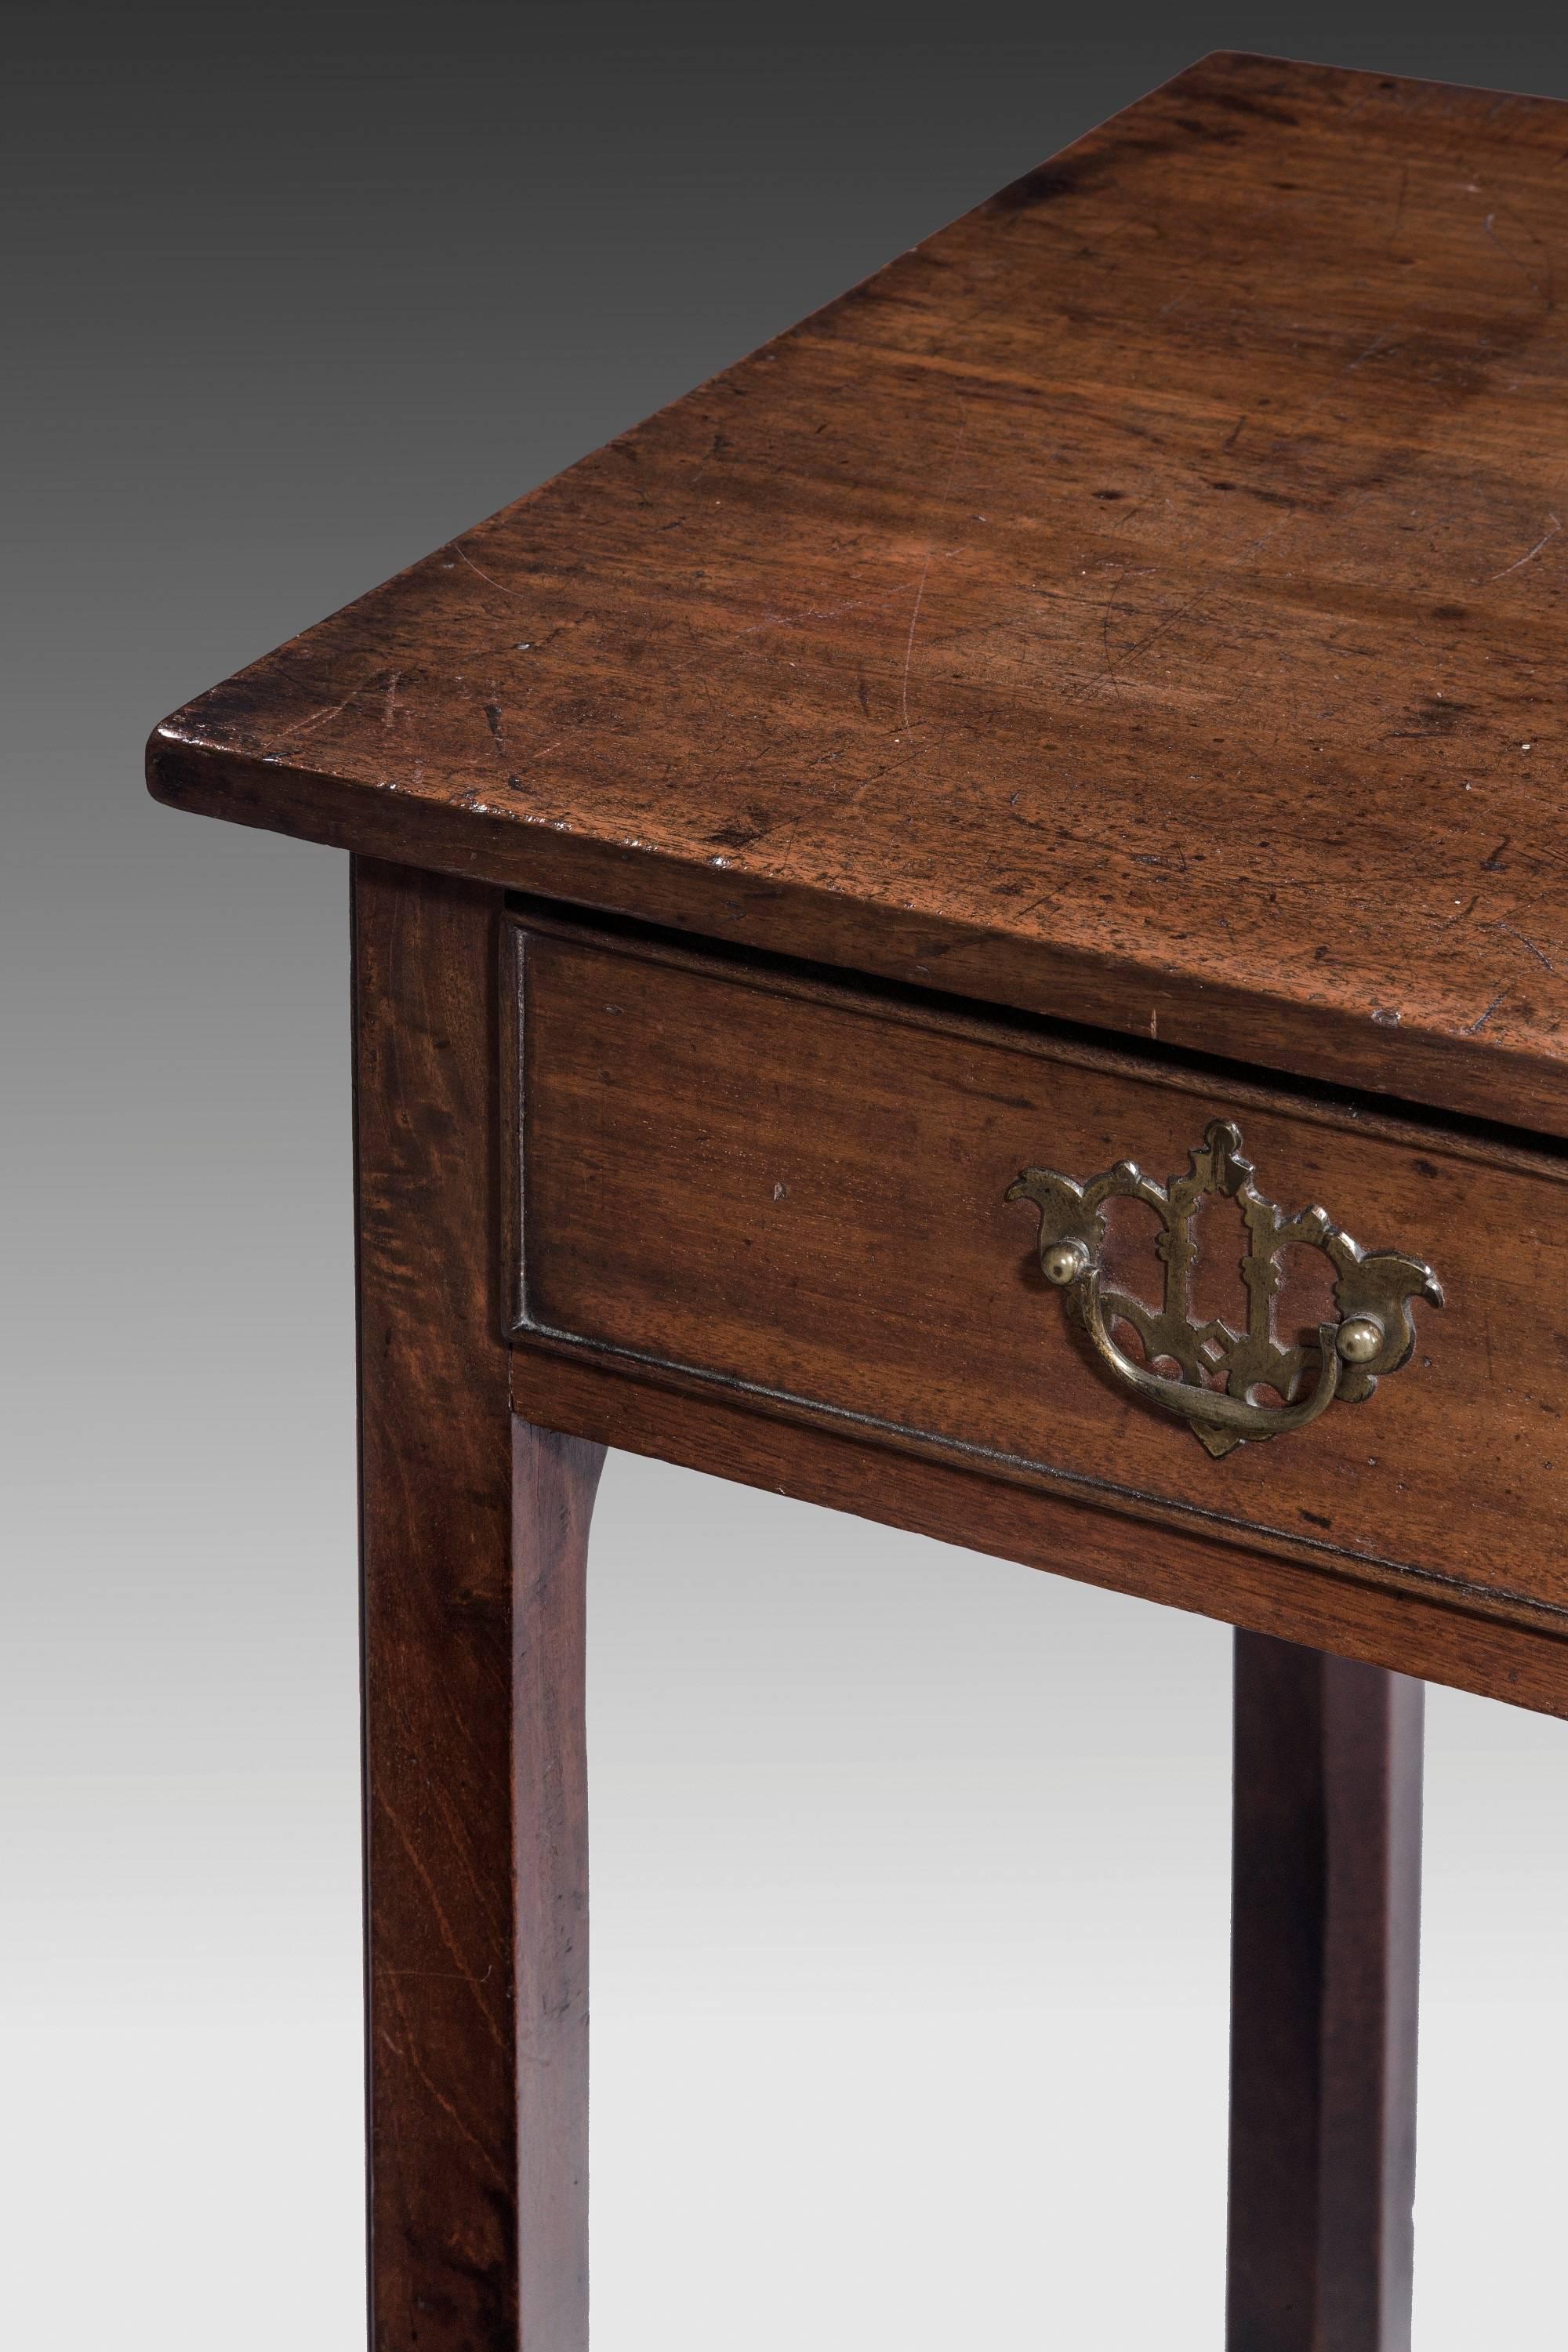 Great Britain (UK) 18th Century Chippendale Period Mahogany Side Table with Chinese Rococo Handles. For Sale